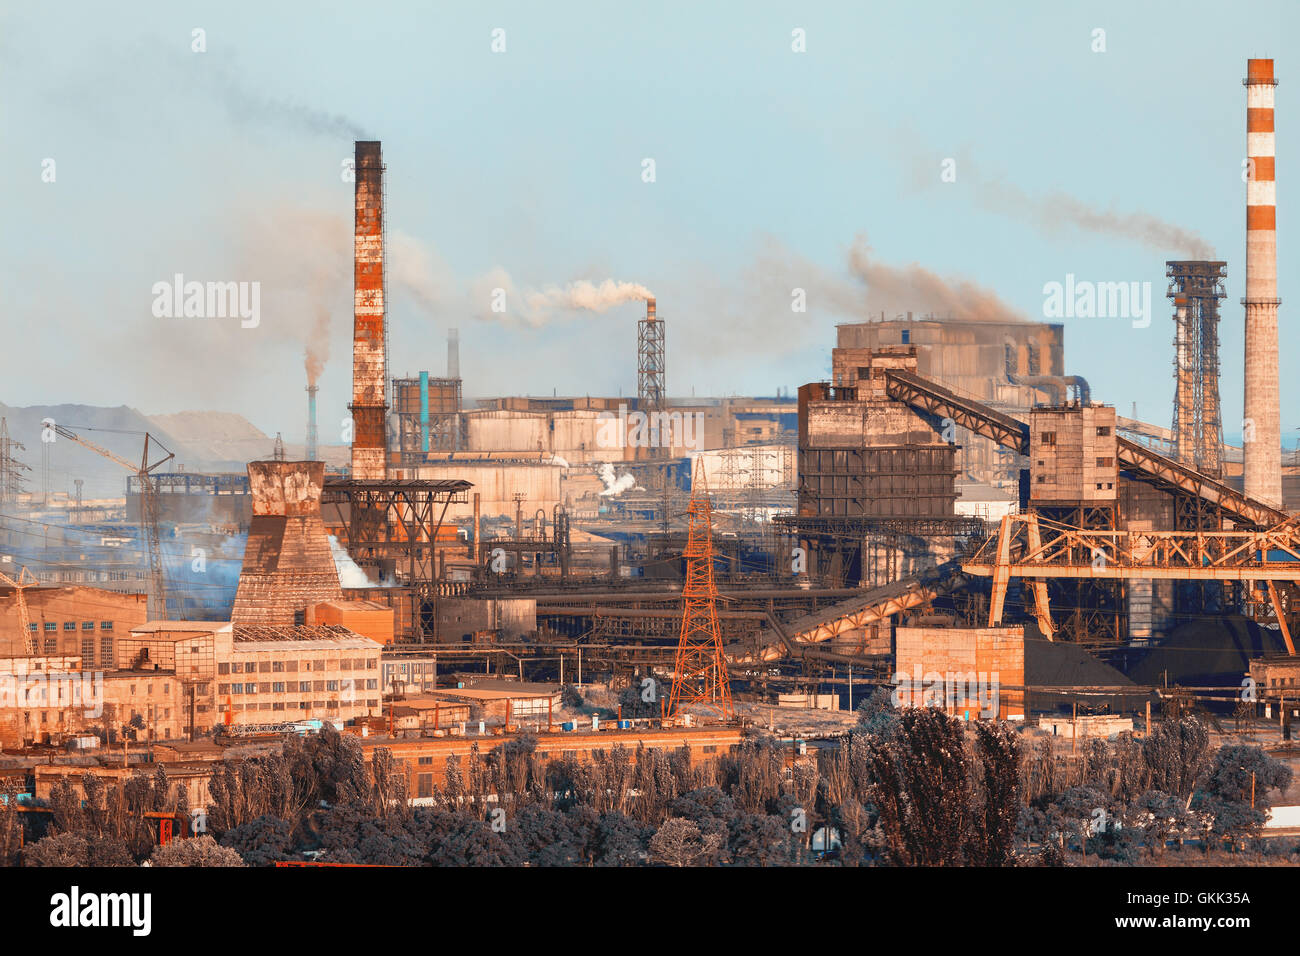 Metallurgical plant. Industrial landscape. Steel factory at sunset. Pipes with smoke. steelworks, iron works. Heavy industry in  Stock Photo